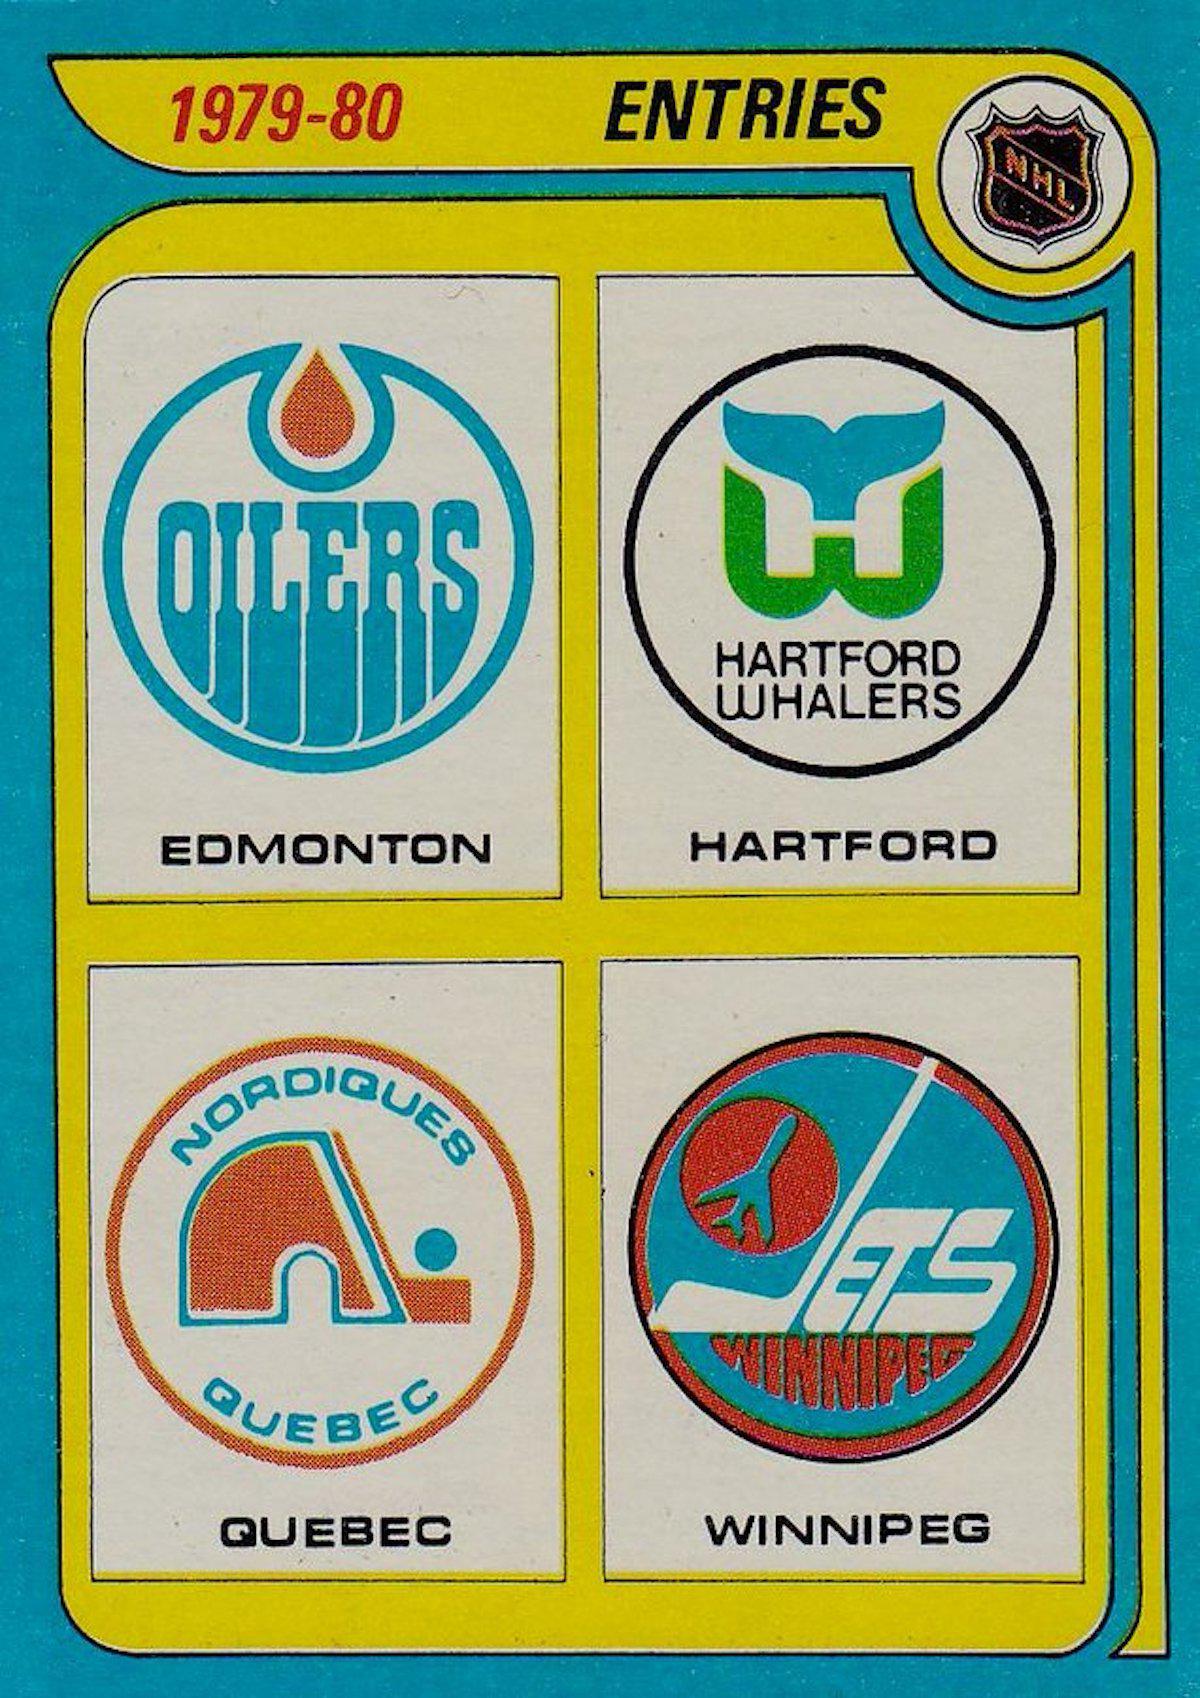 The earliest sketches of the Hartford Whalers logo are so, so cool